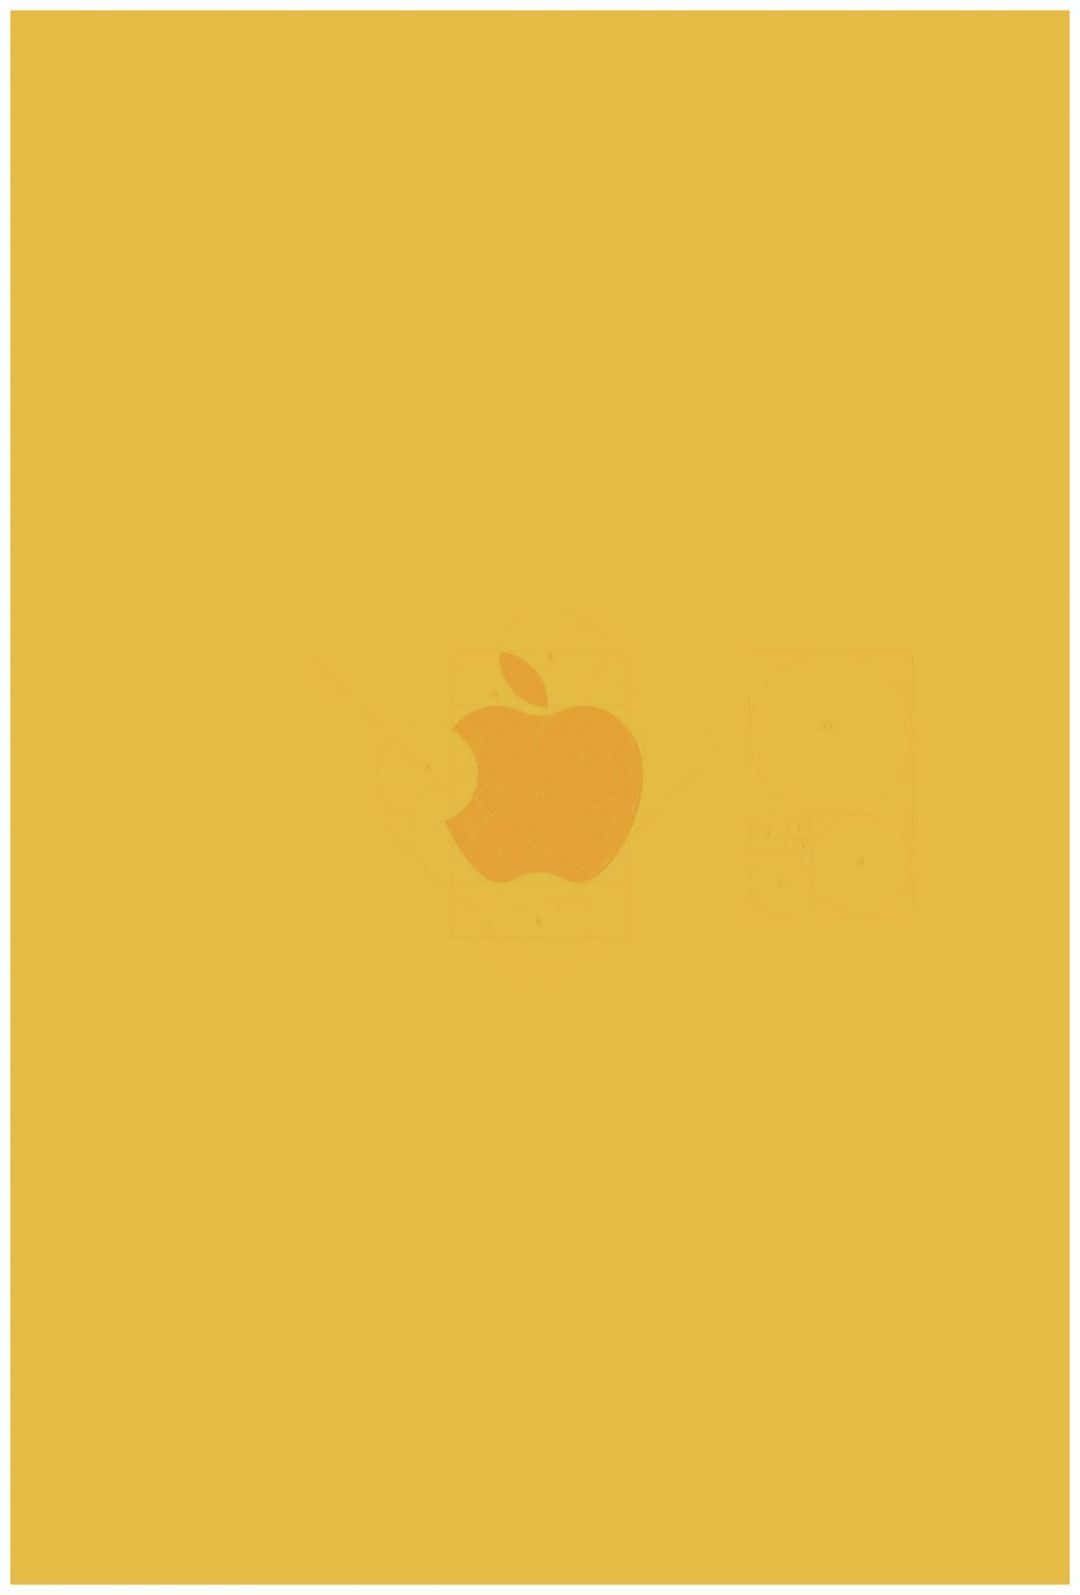 Enjoy The Sun-filled Vibes Of Yellow Aesthetic With The Iphone. Background